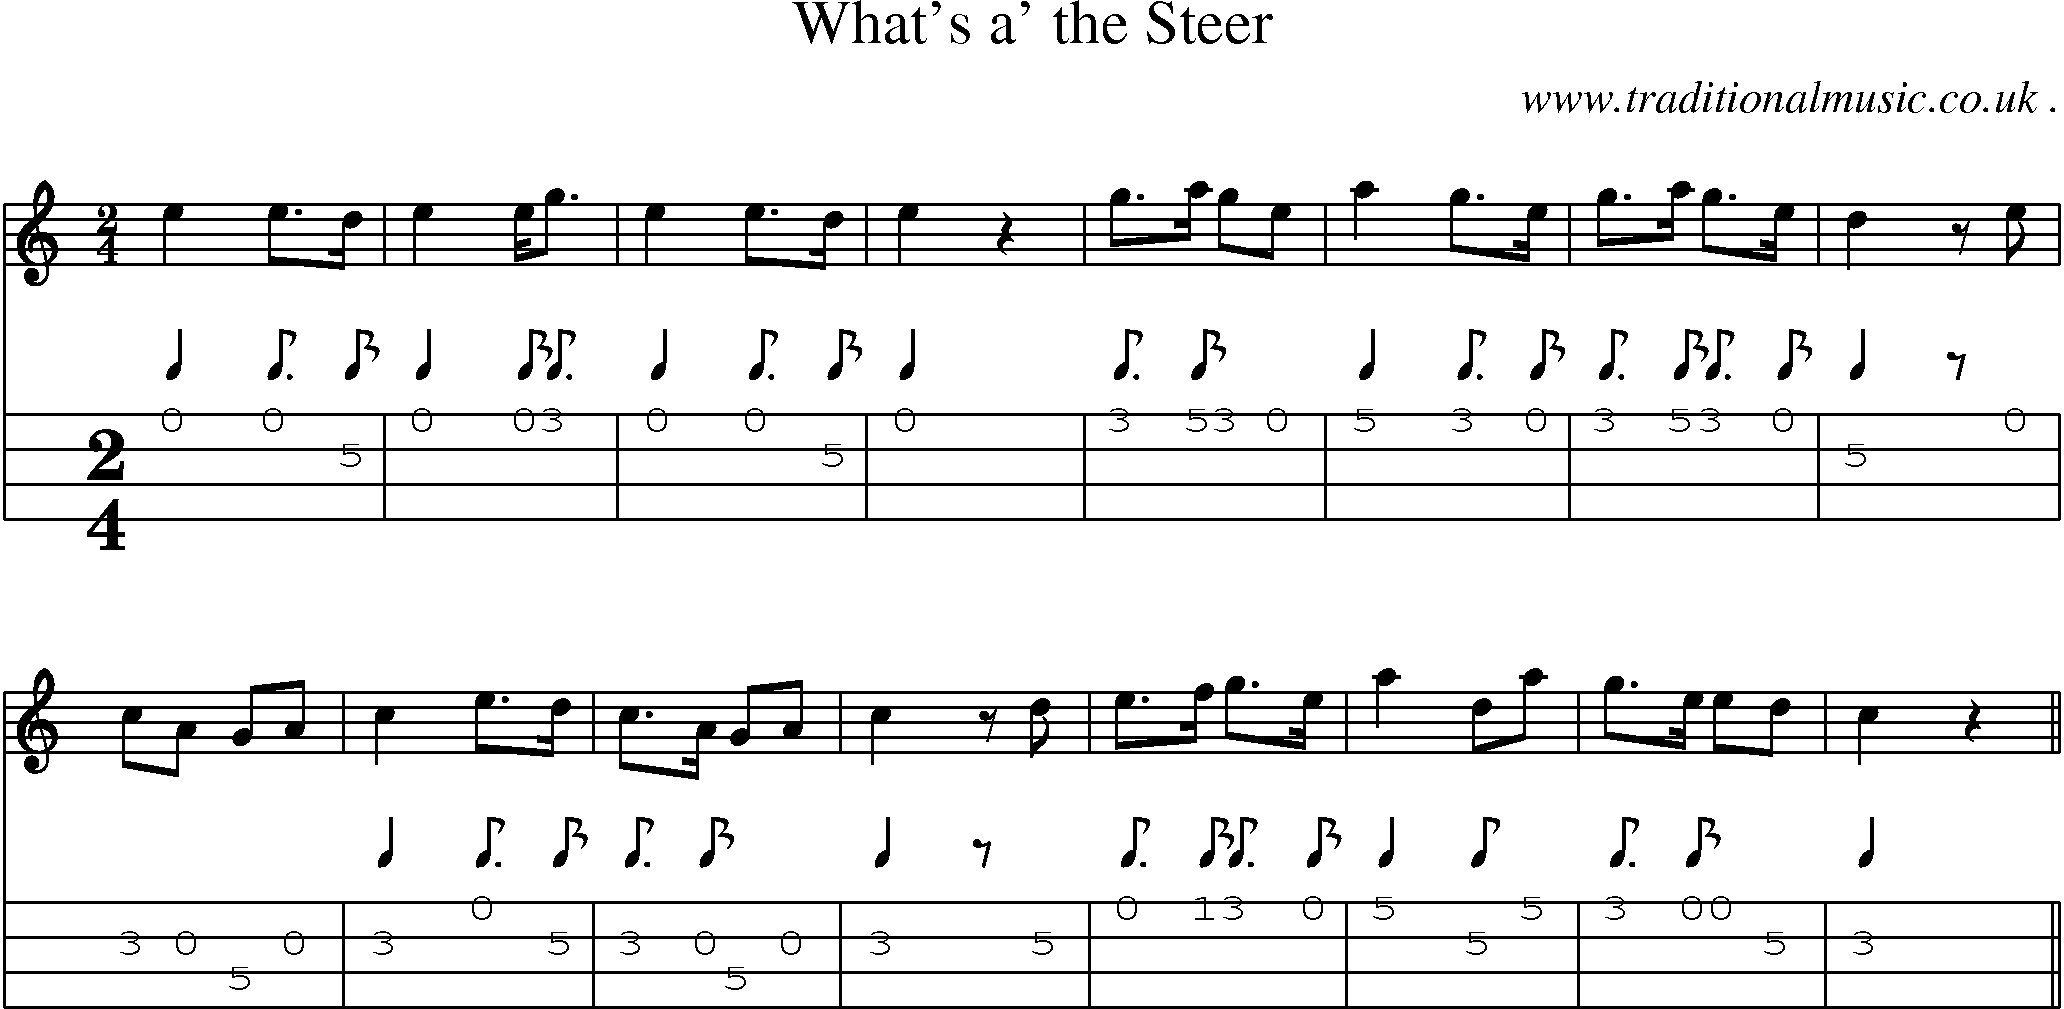 Sheet-music  score, Chords and Mandolin Tabs for Whats A The Steer